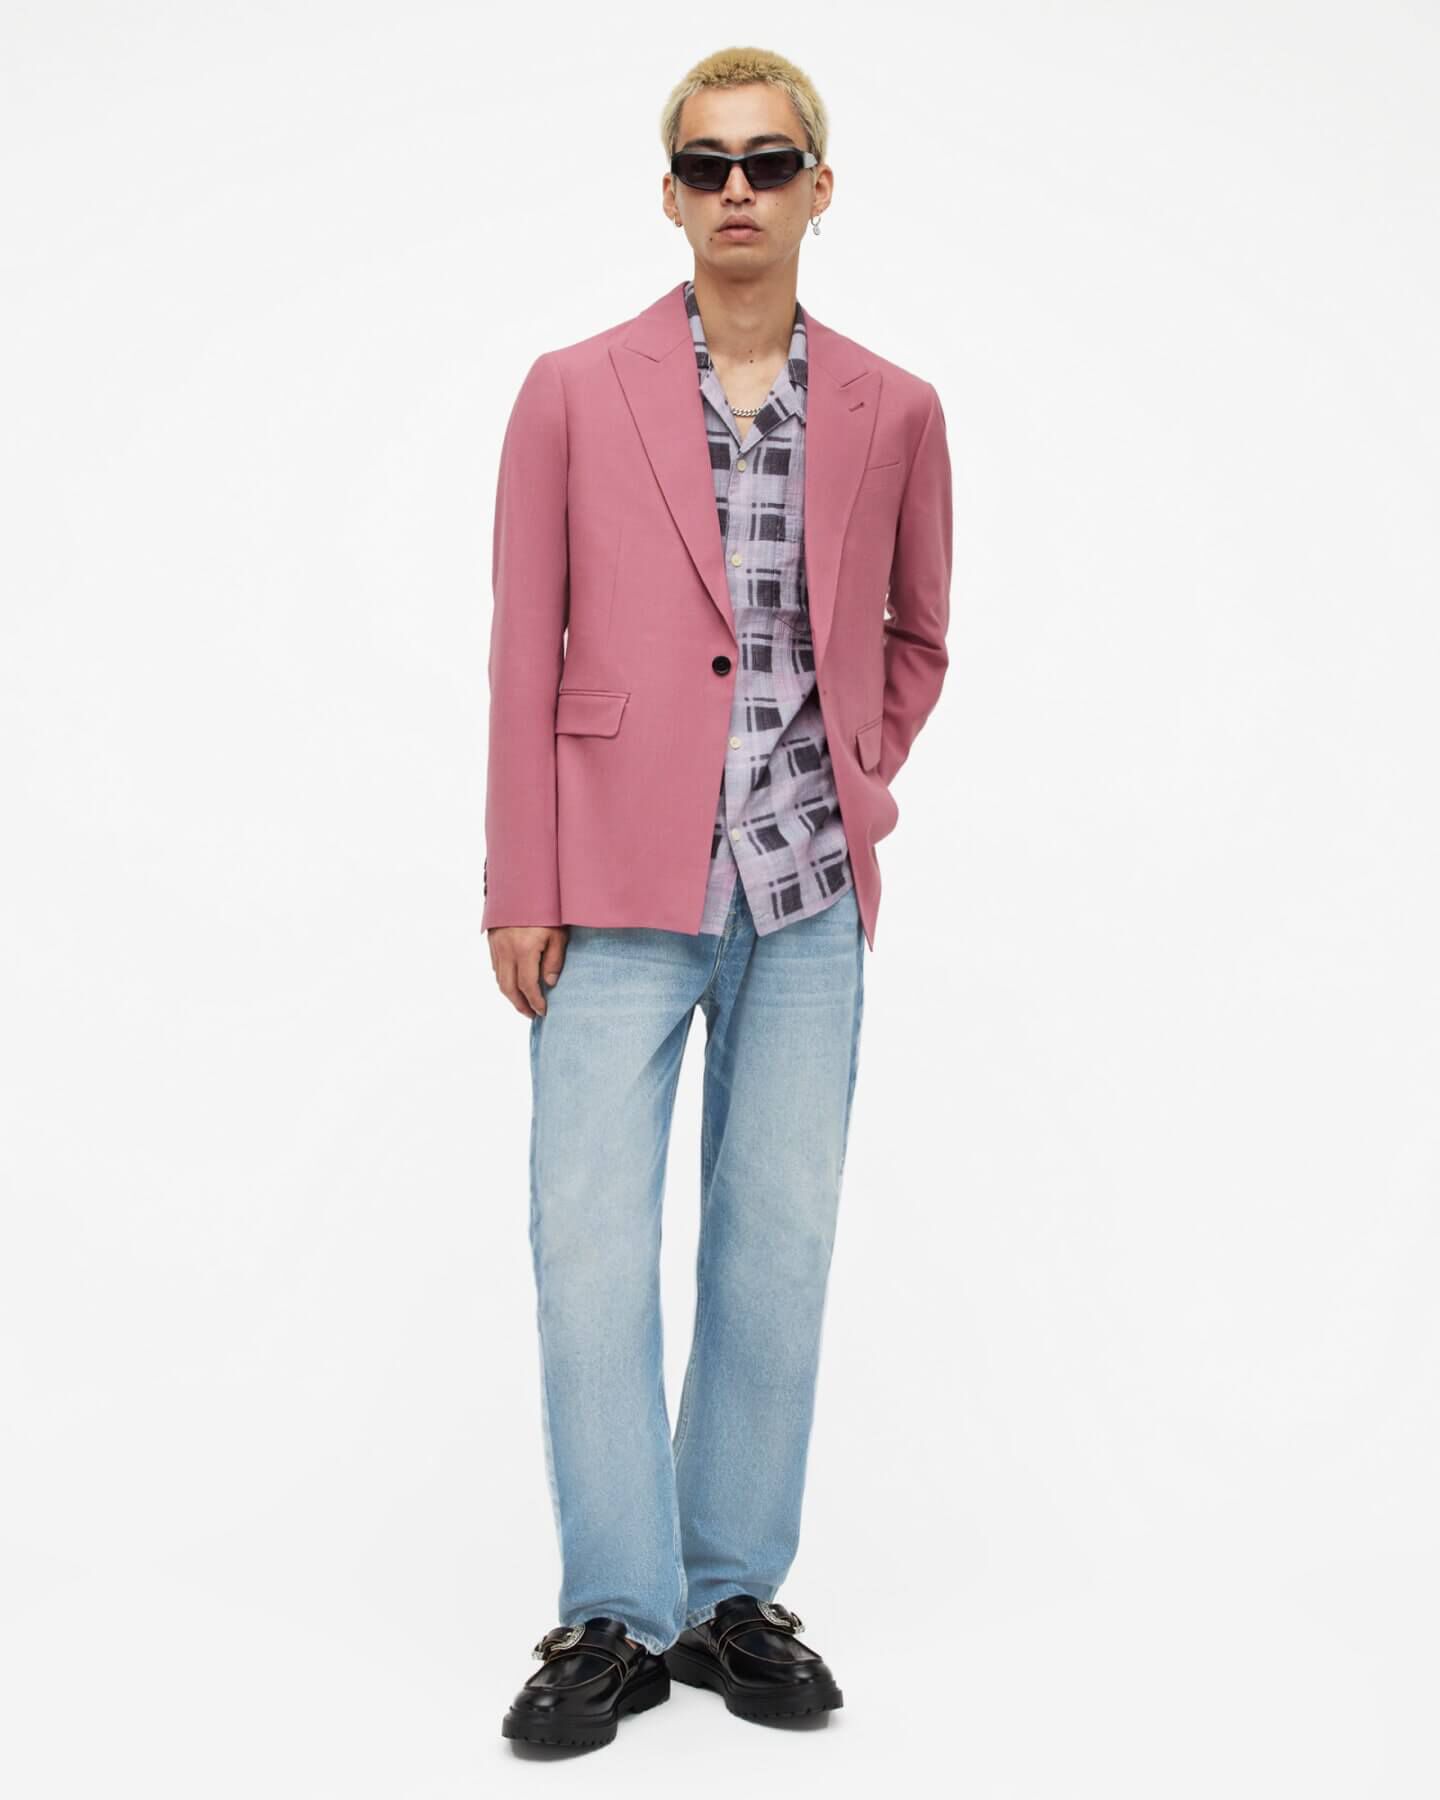 Man wearing a pink blazer over checked shirt and light blue jeans.